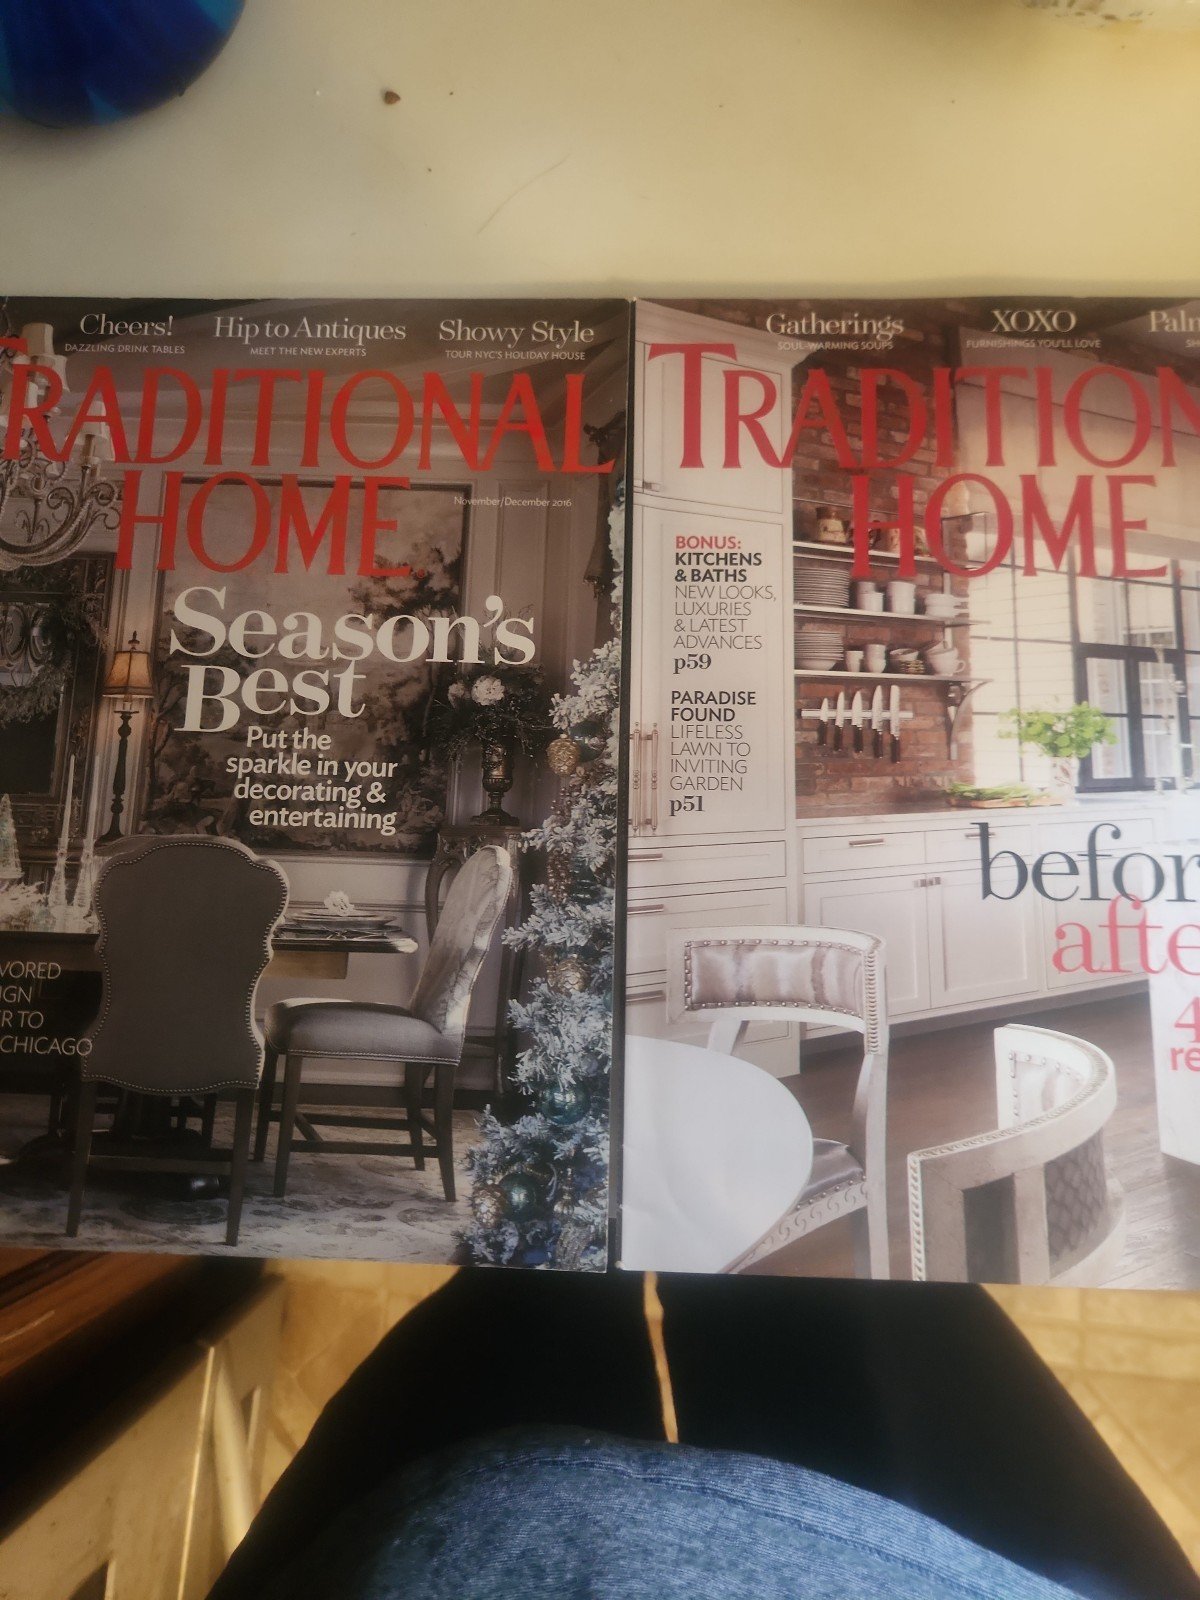 Lot of traditional home magazines 1vtB4nXwC